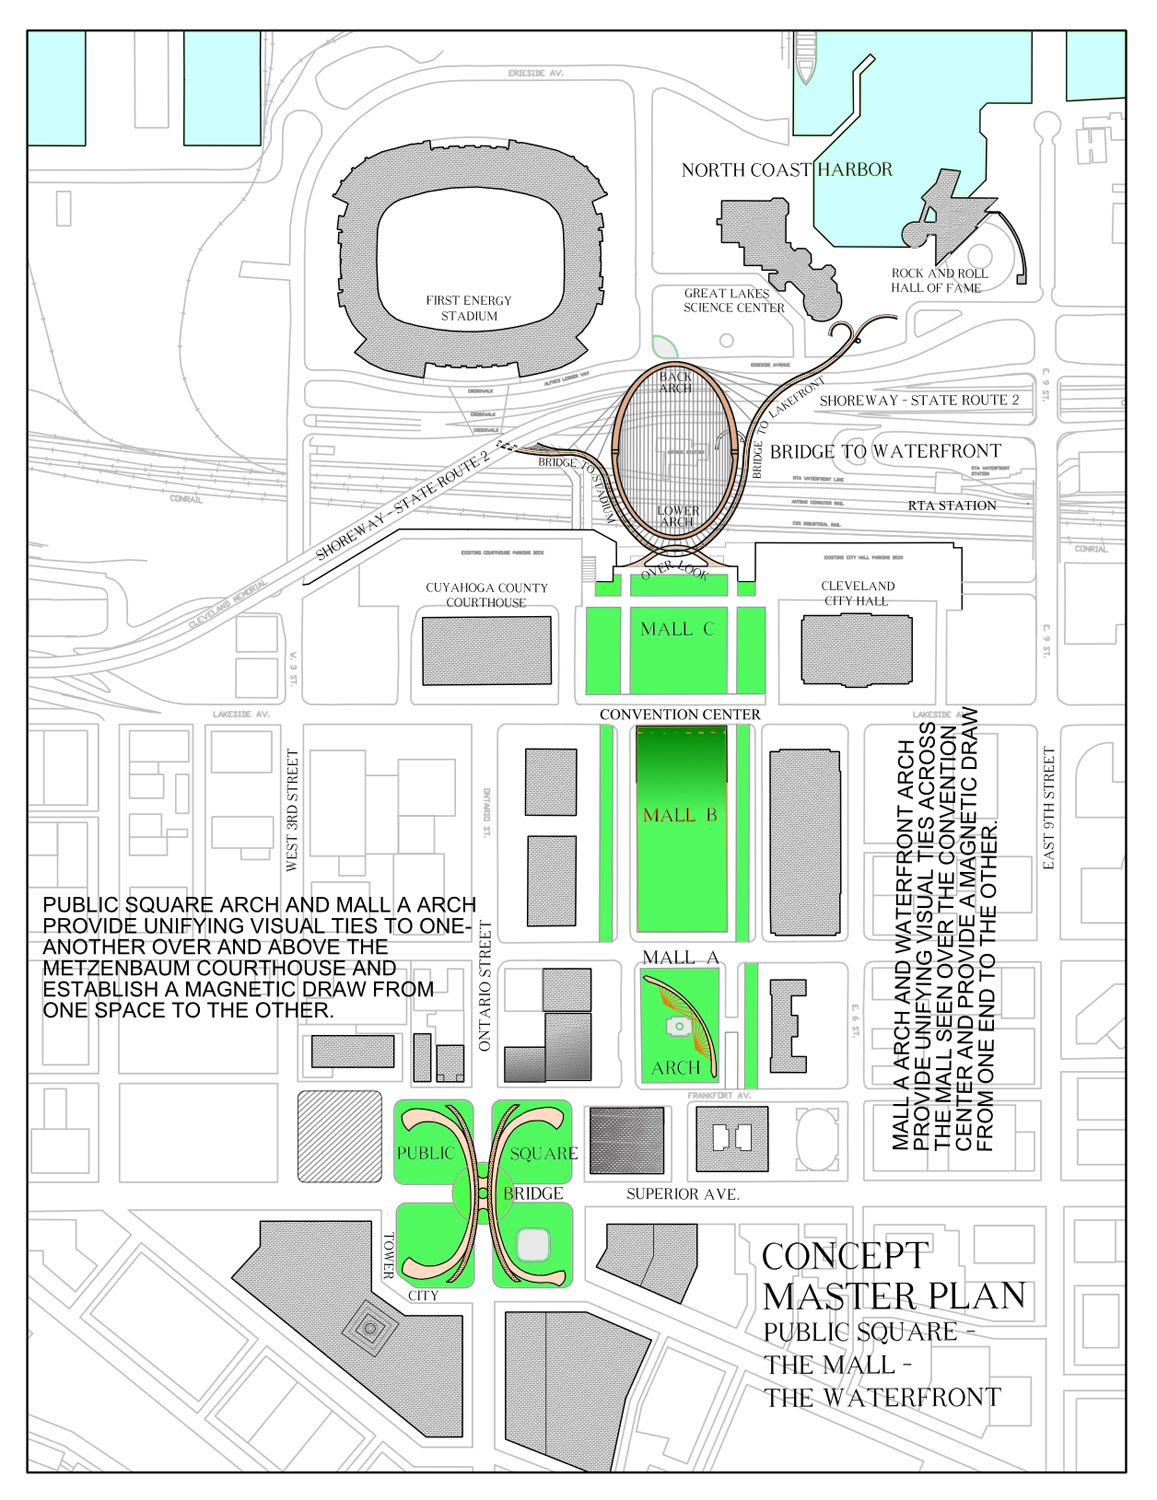 Master Plan for Cleveland Public Square, The Mall, and the Waterfront Bridge